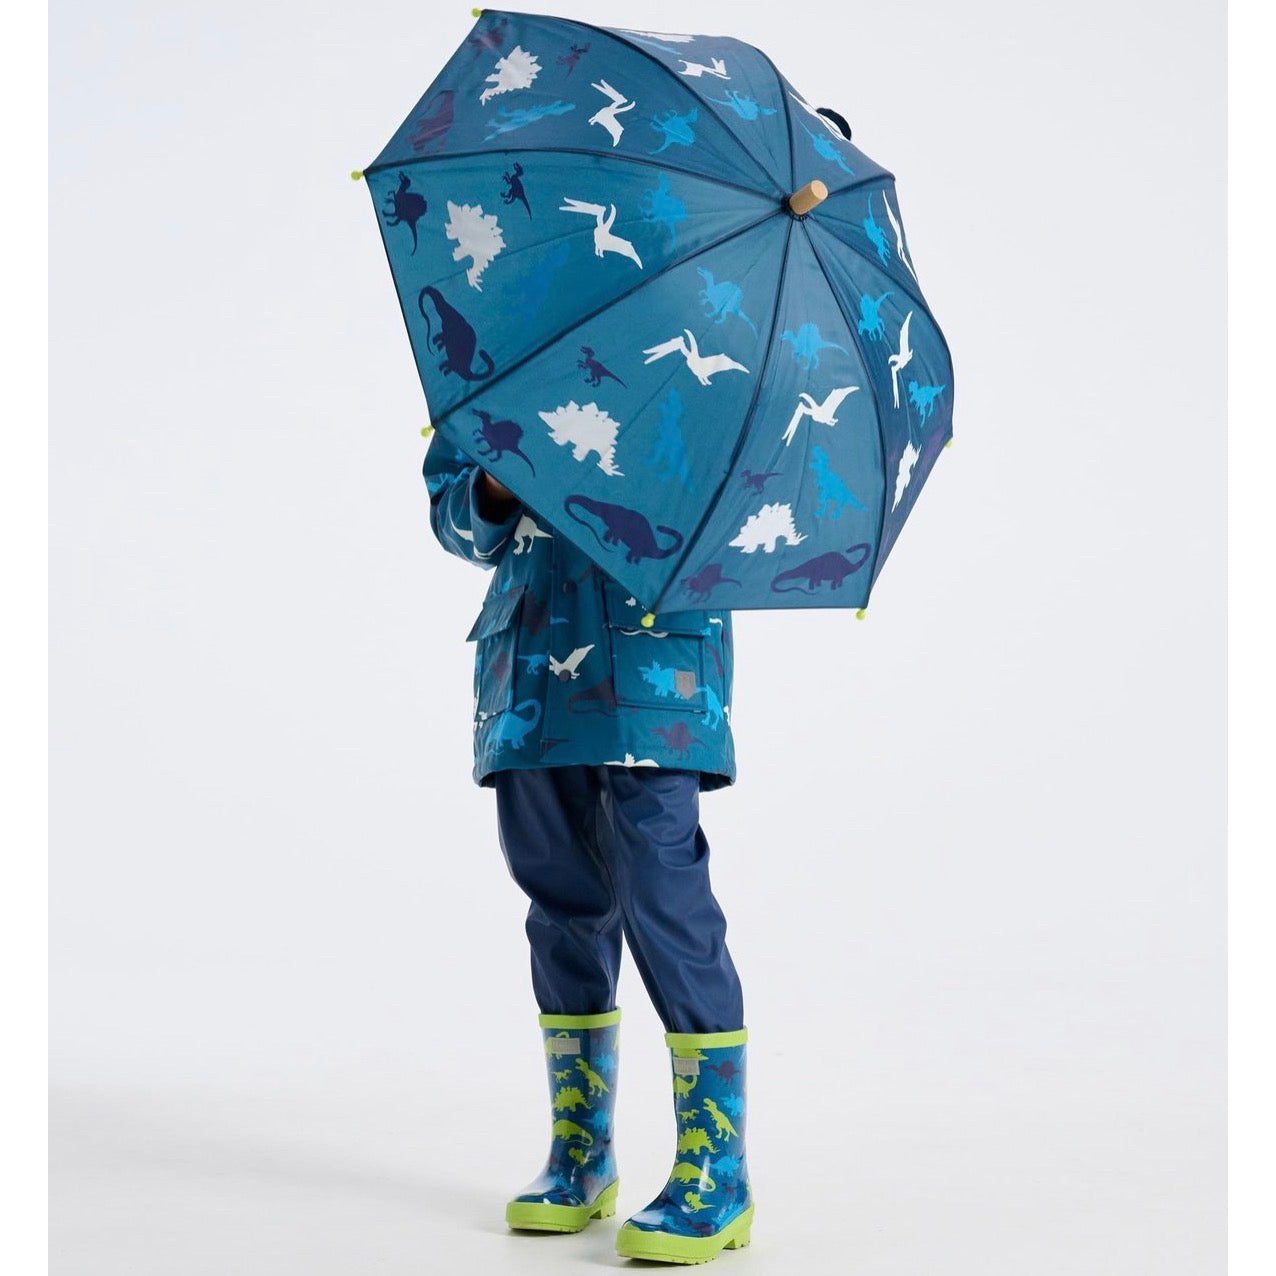 Hatley Real Dinos Colour Changing Umbrella F23dsk021 Accessories ONE SIZE / Blue